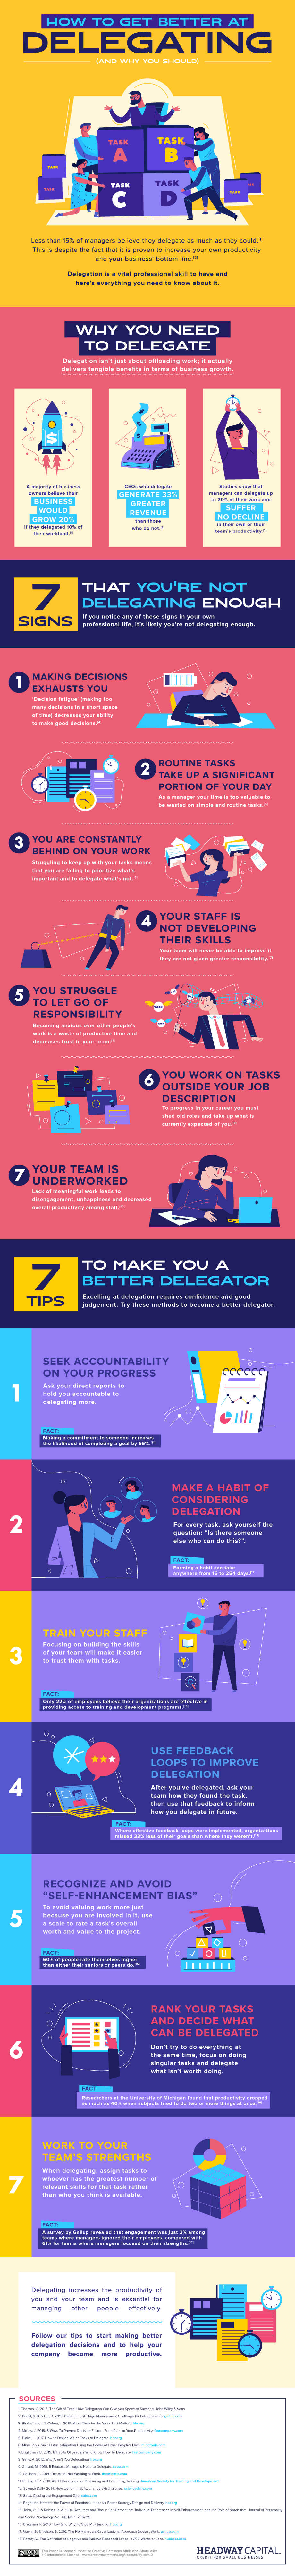 How to get better at delegation Infographic